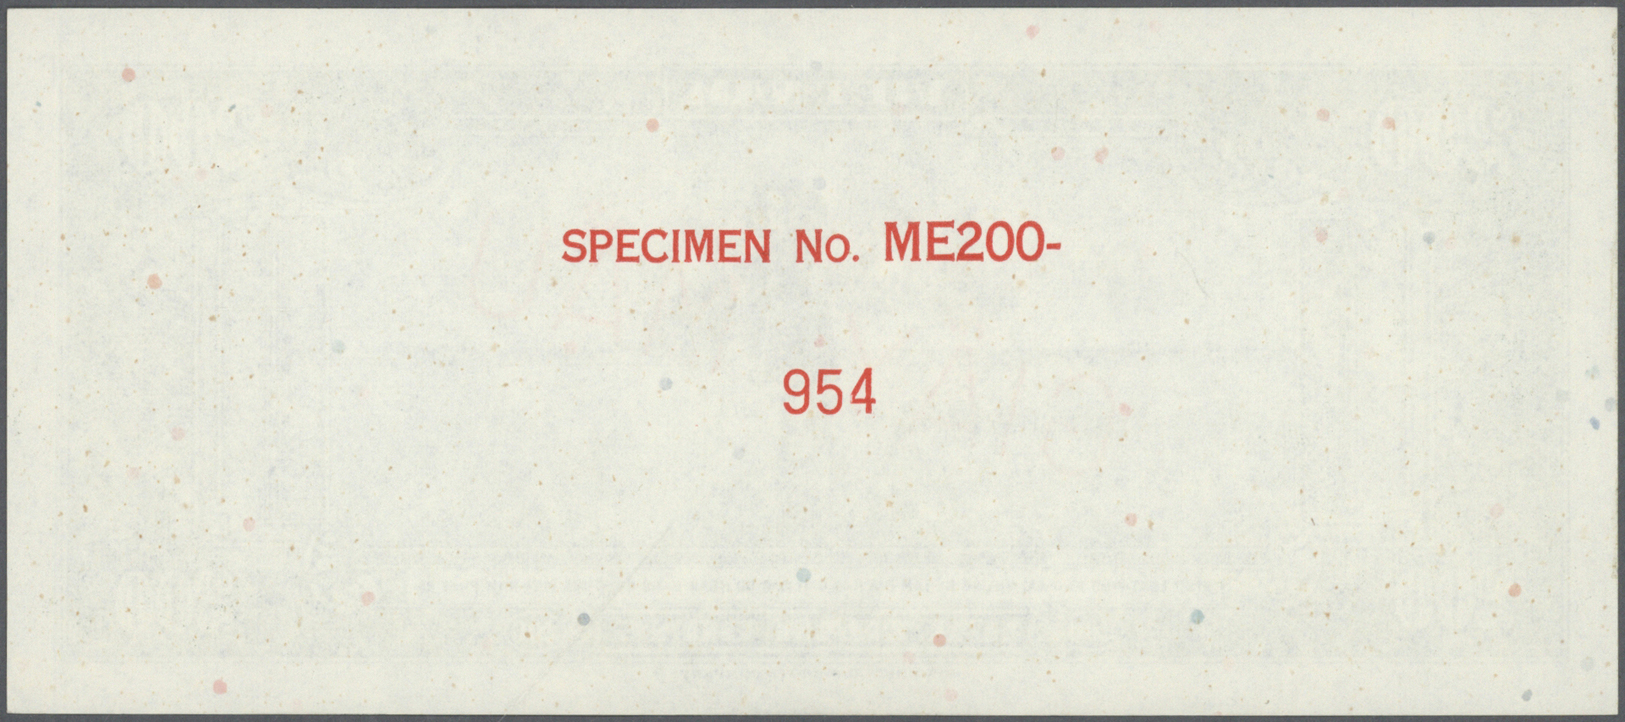 02967 South Vietnam / Süd Vietnam: large set of 11 separately printed front and back side proofs (total 22 proofs font &